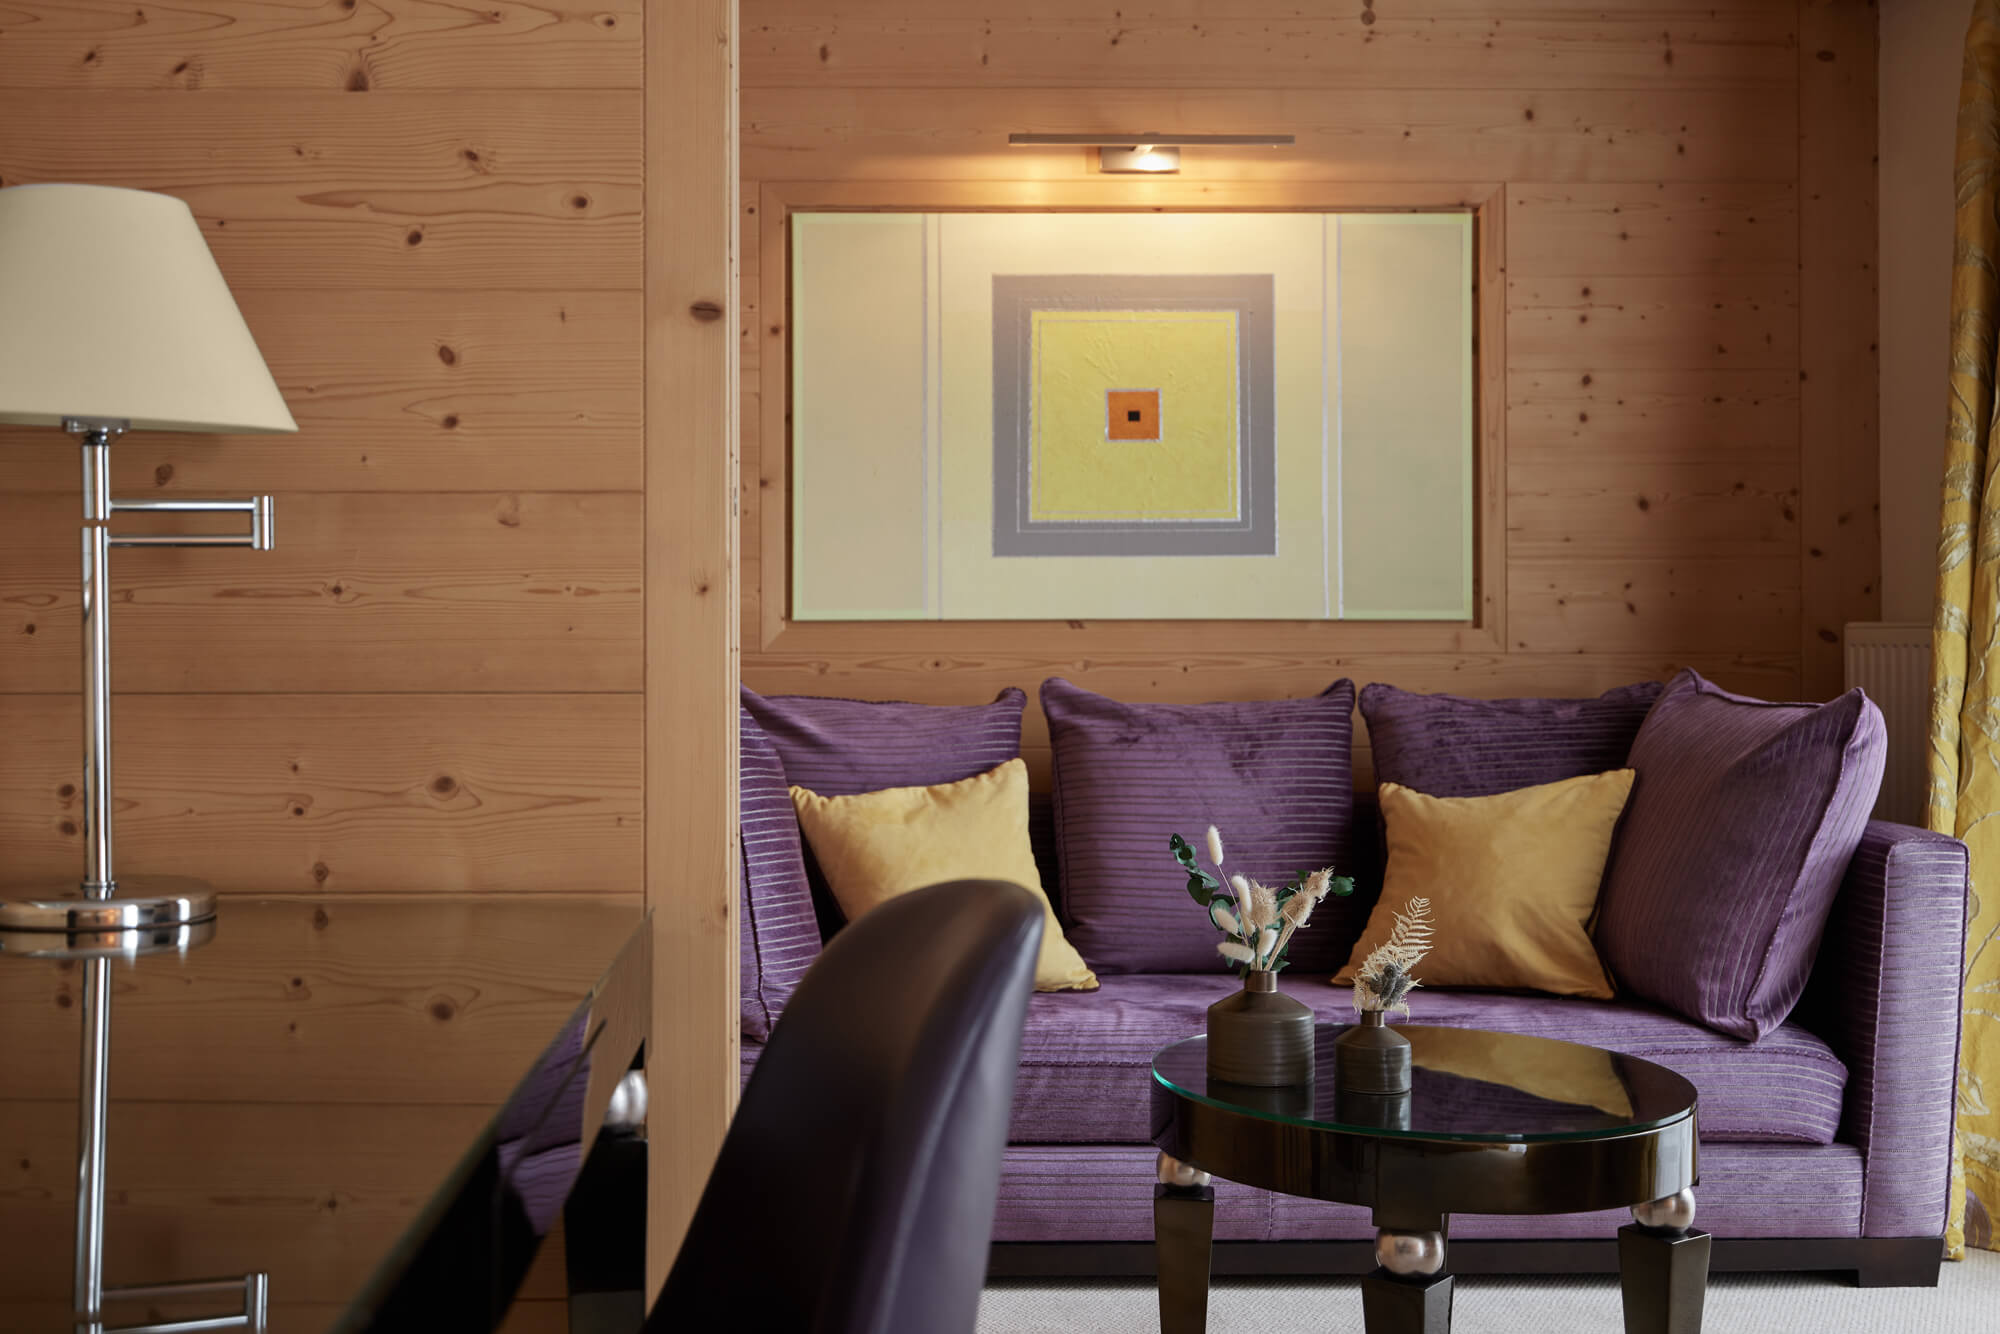 A purple couch with yellow pillows and a glass table in a stylish interior design setting